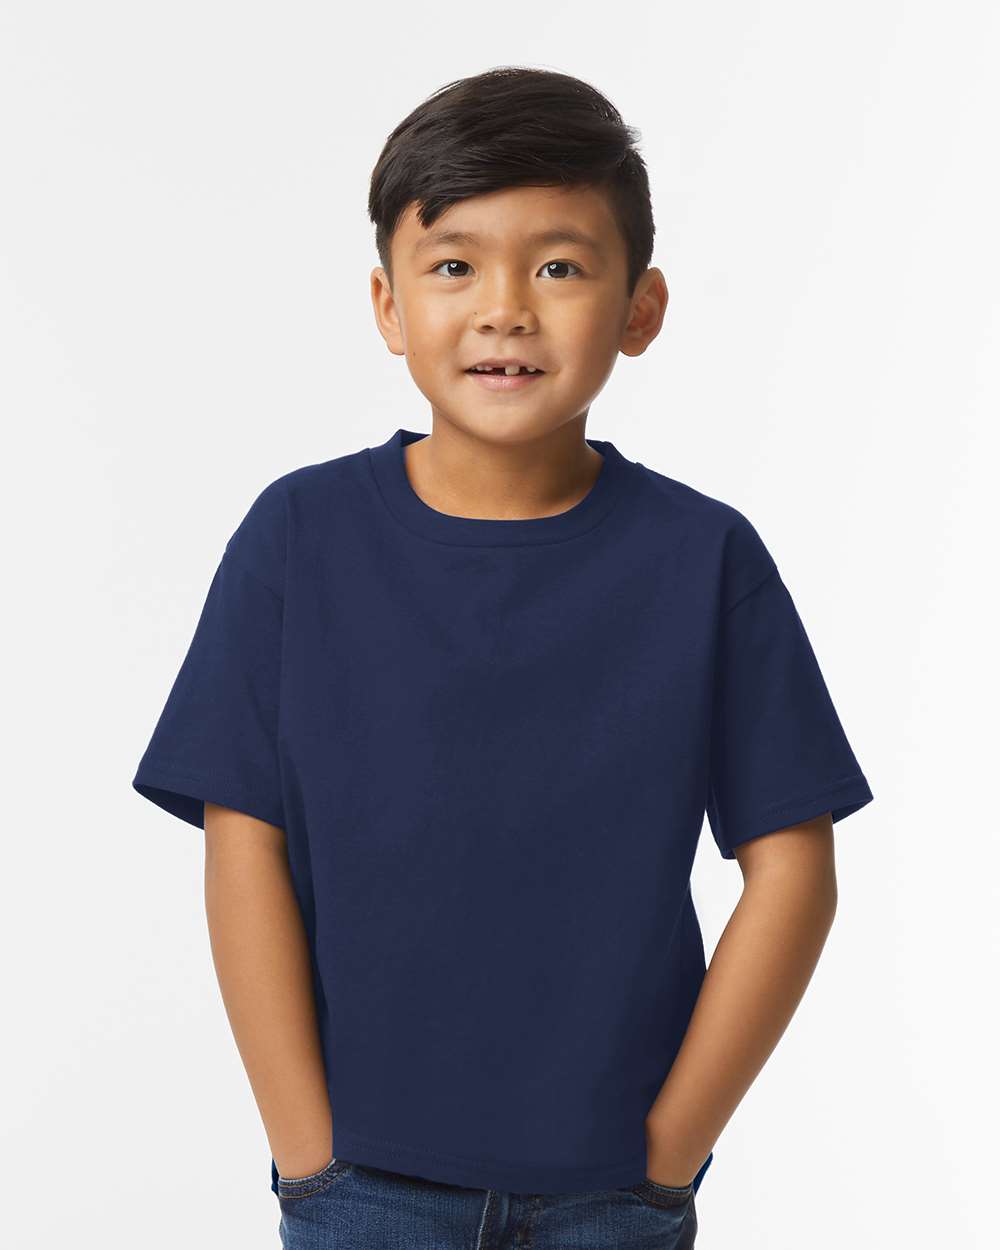 GILDAN® Youth Midweight T-Shirt For Youth